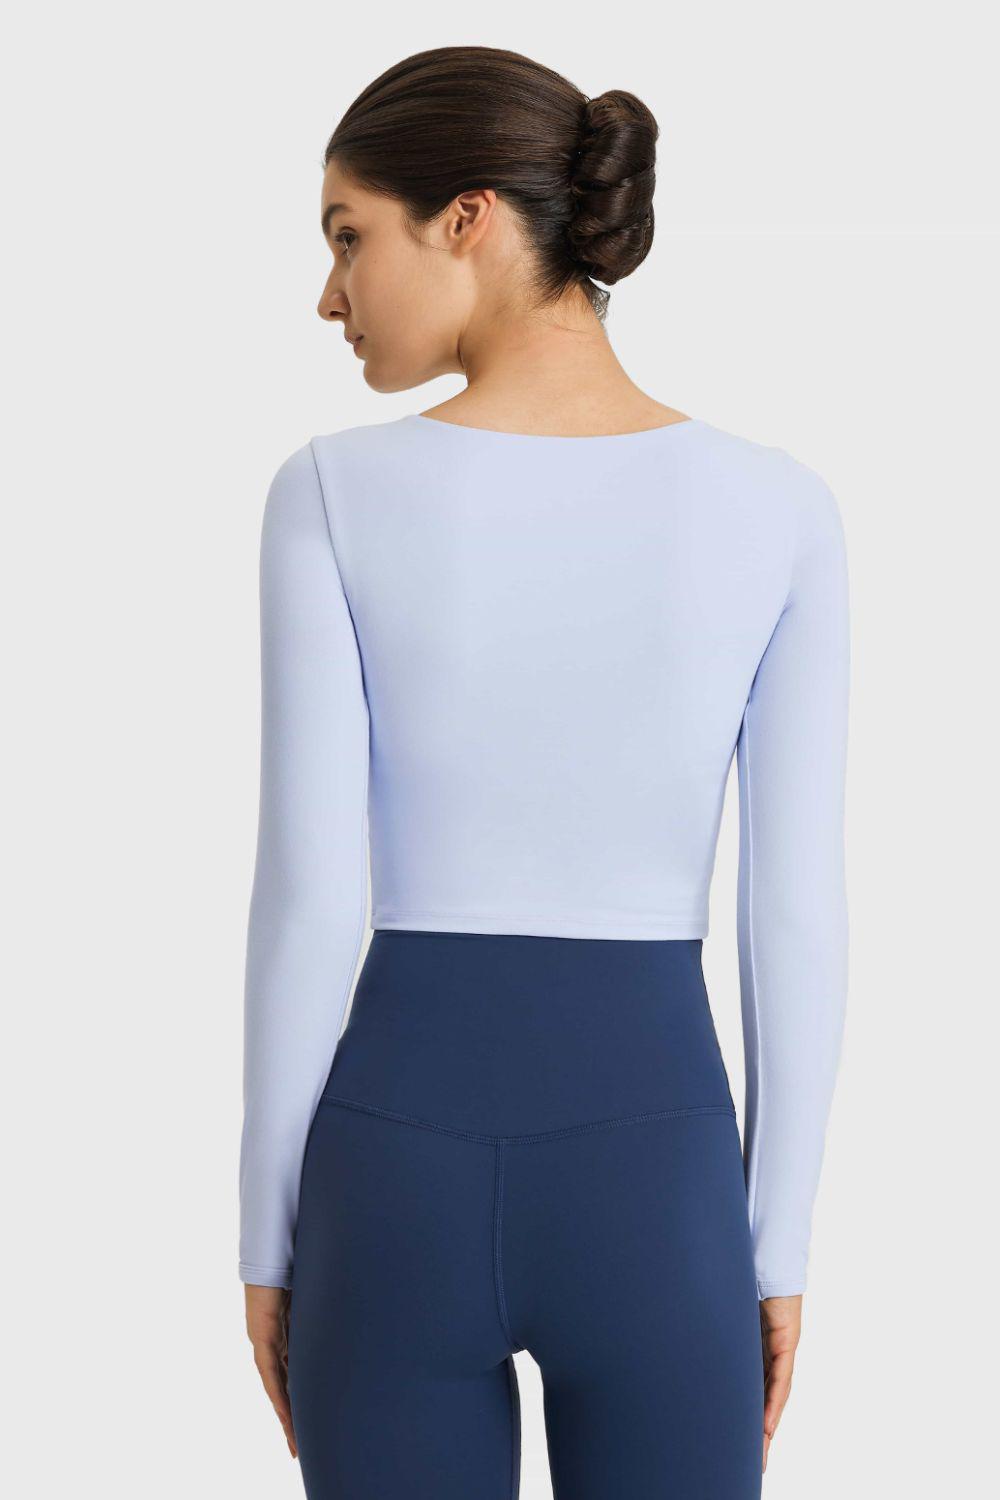 Cutout Long Sleeve Cropped Sports Top-TOPS / DRESSES-[Adult]-[Female]-Blue Zone Planet